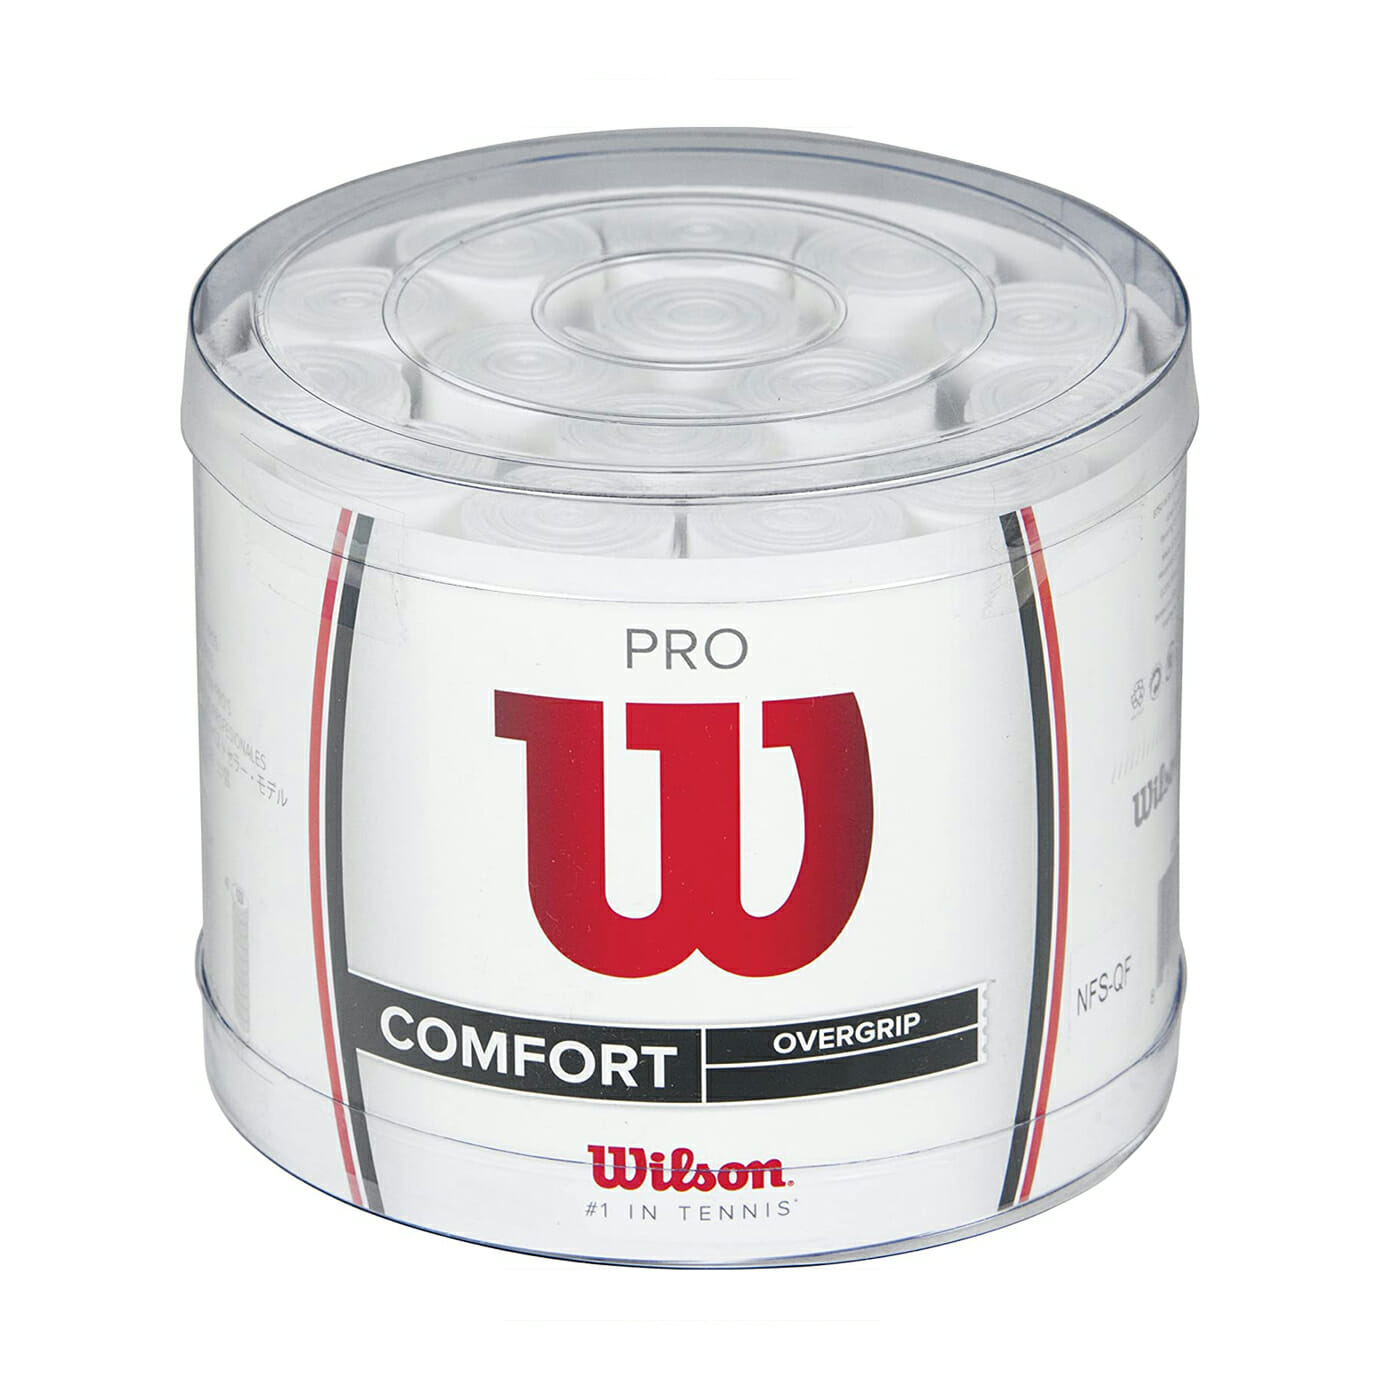 Wilson Feel PRO perforated Overgrip one piece